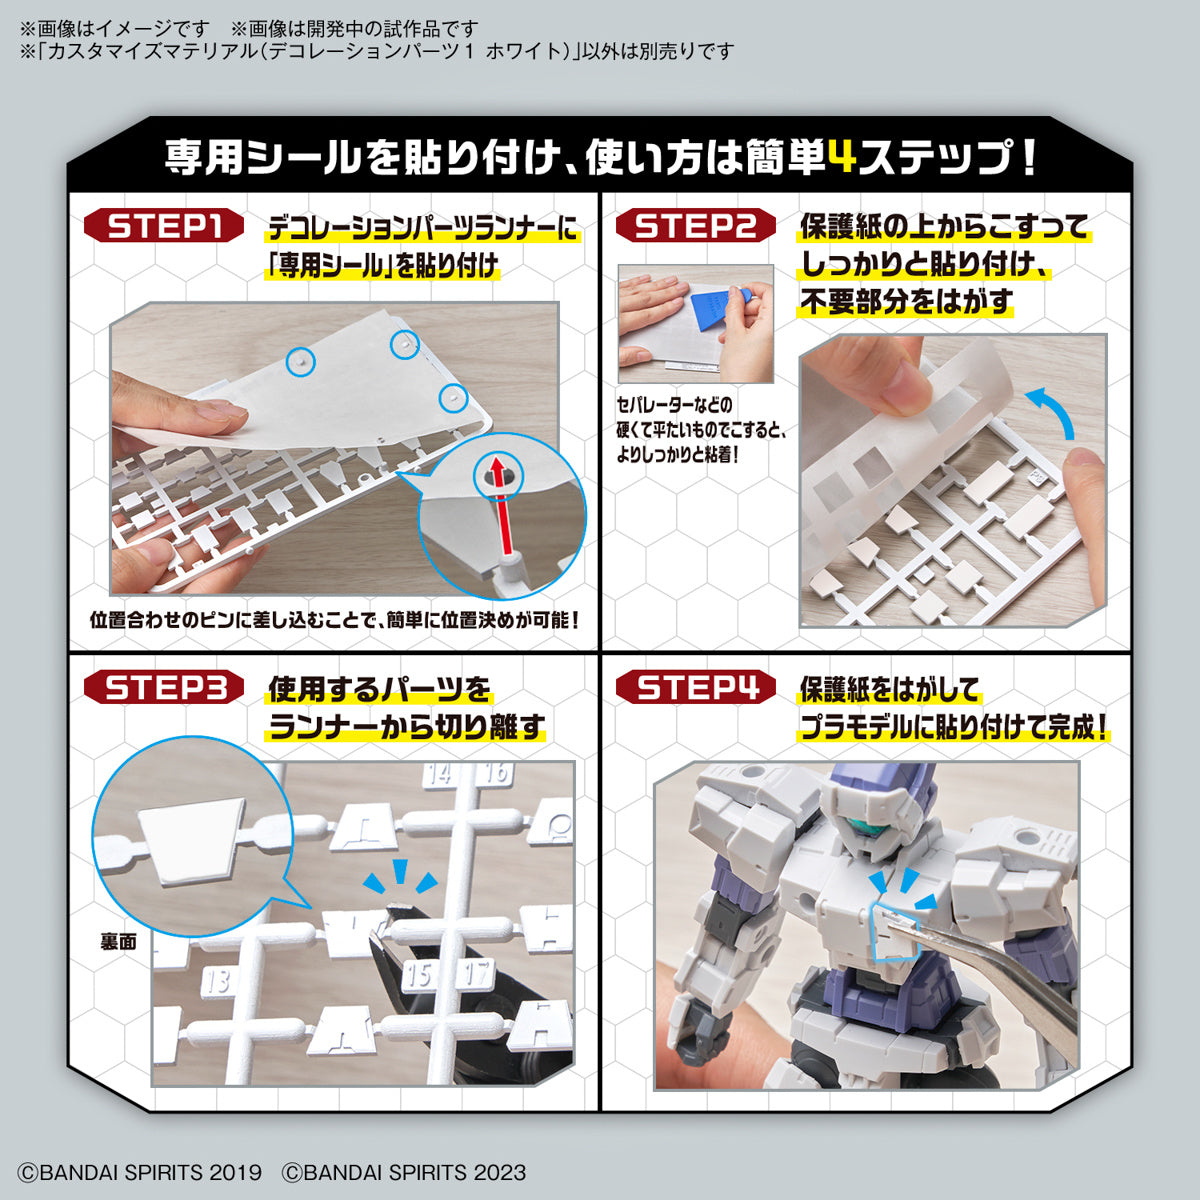 Bandai 30 Minutes Missions 30MM #08 1/144 Customize Material Decoration Parts 1 (White) Model Kit